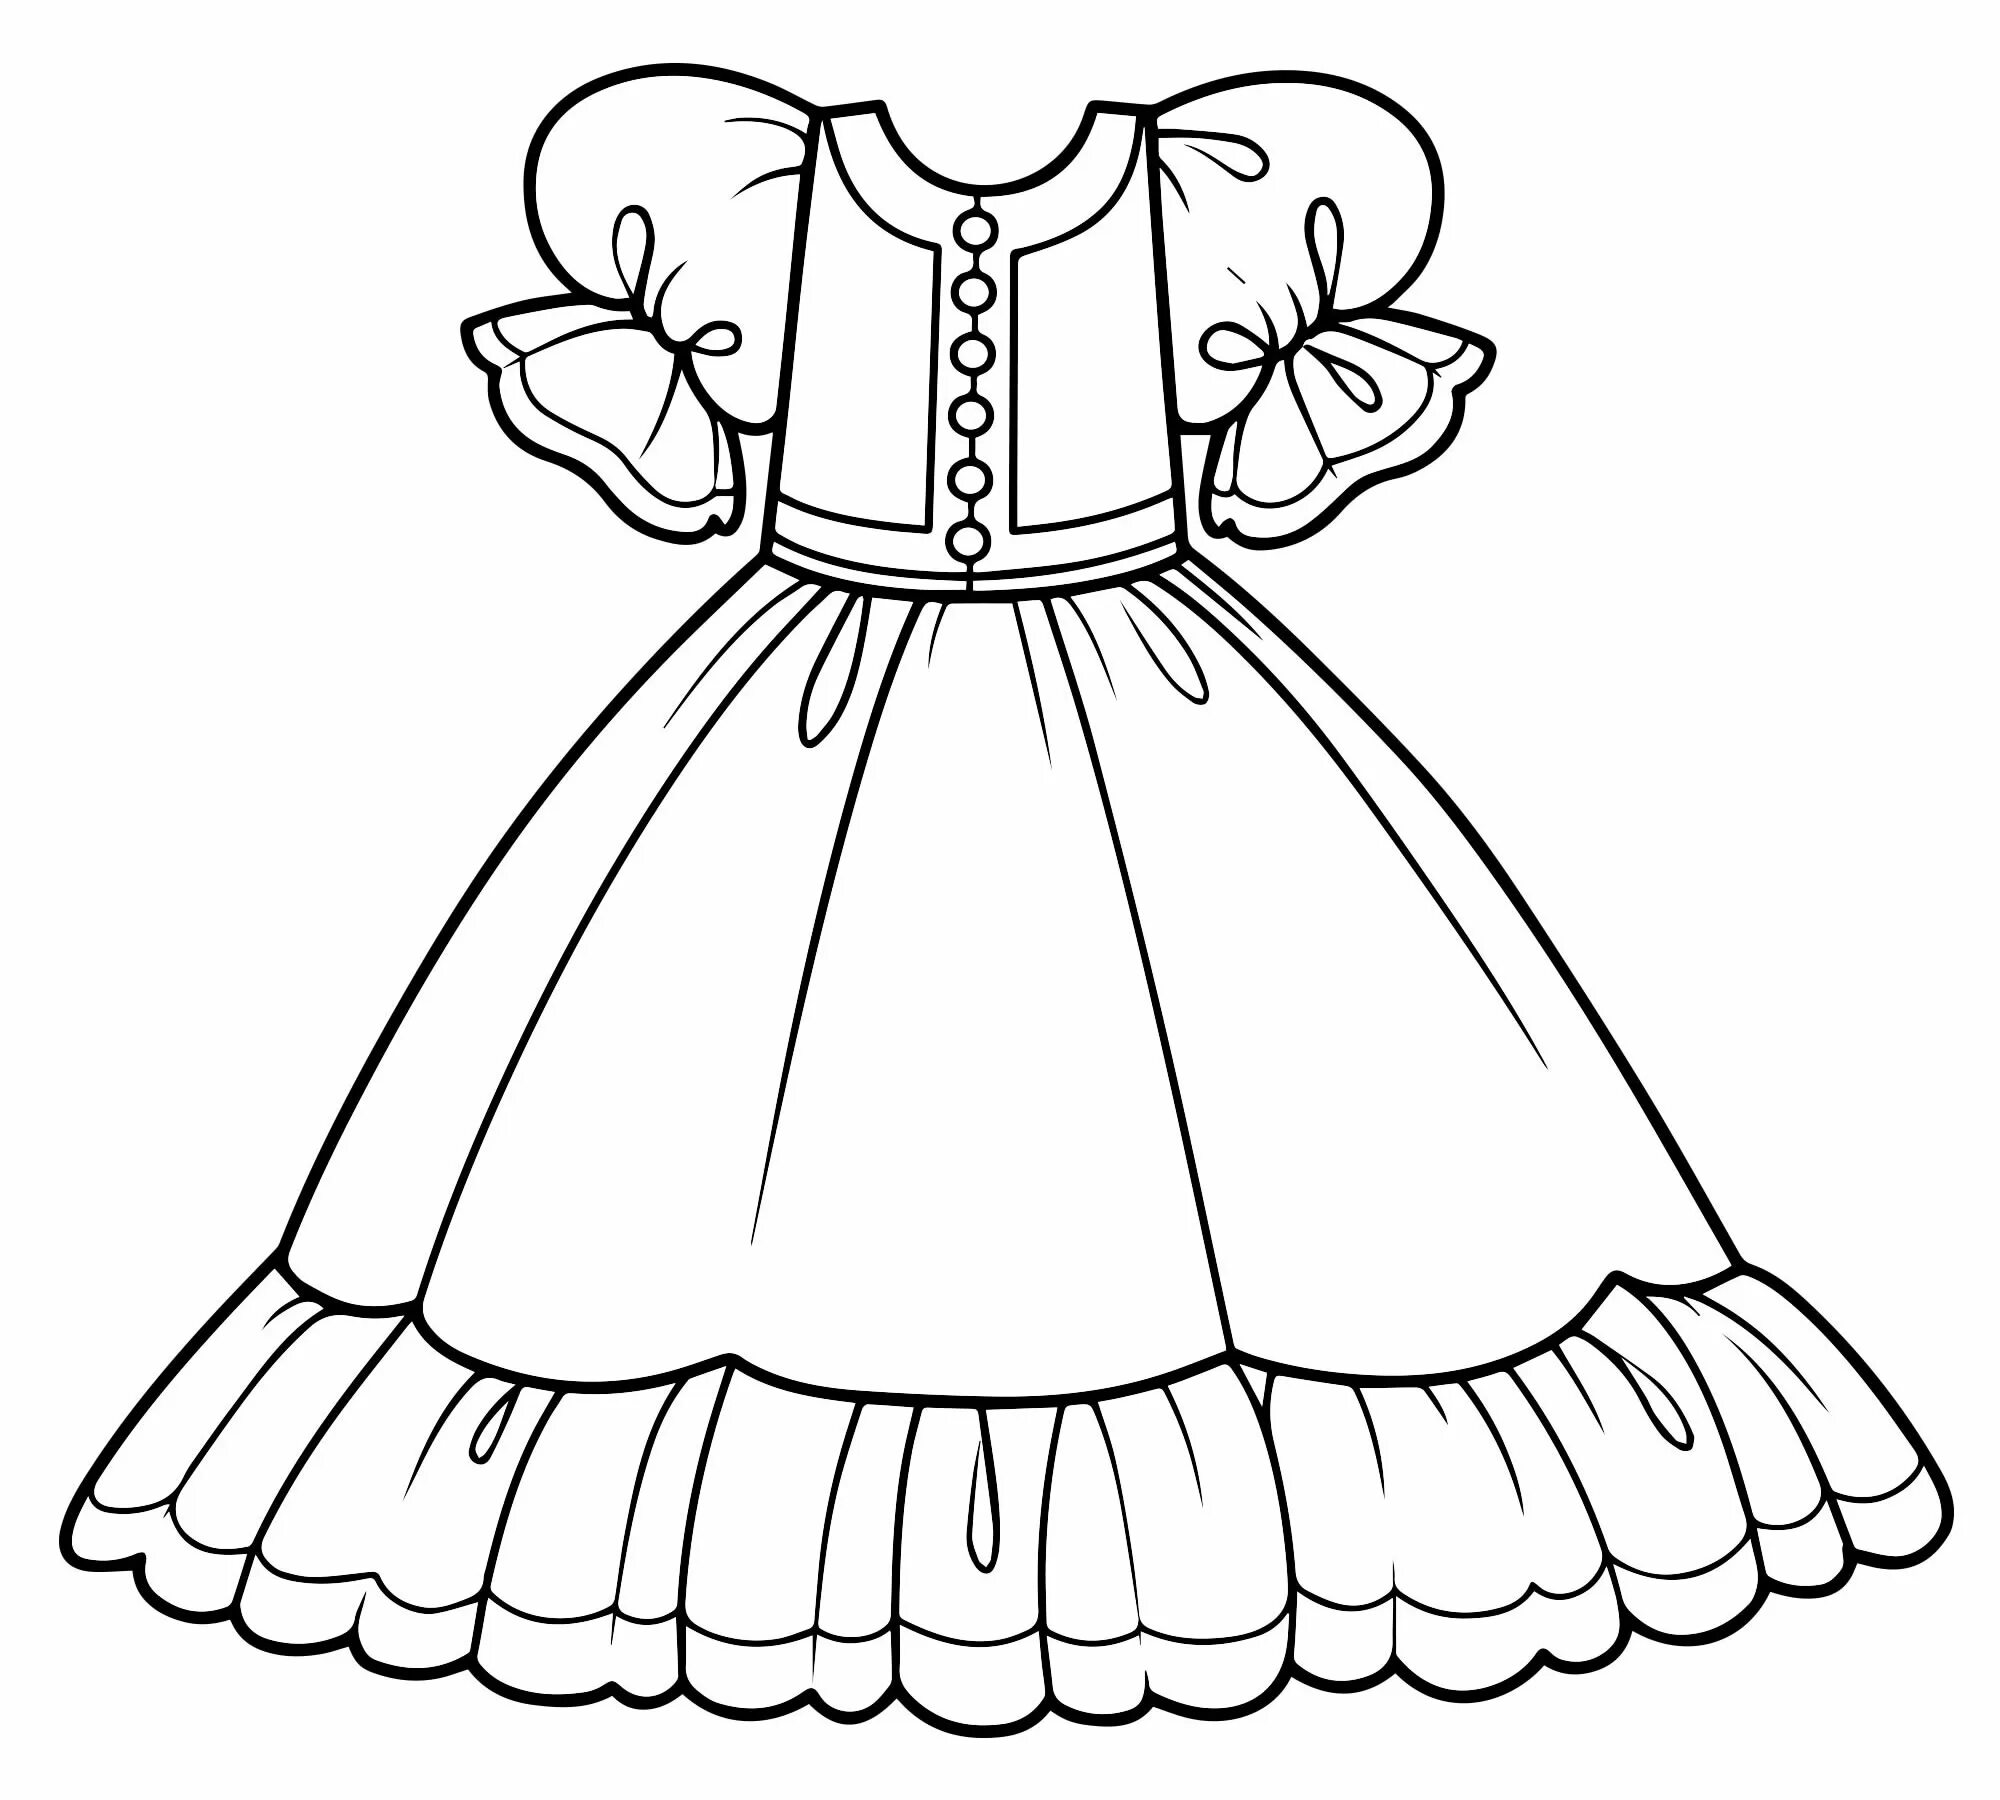 Coloring page majestic dress for mom